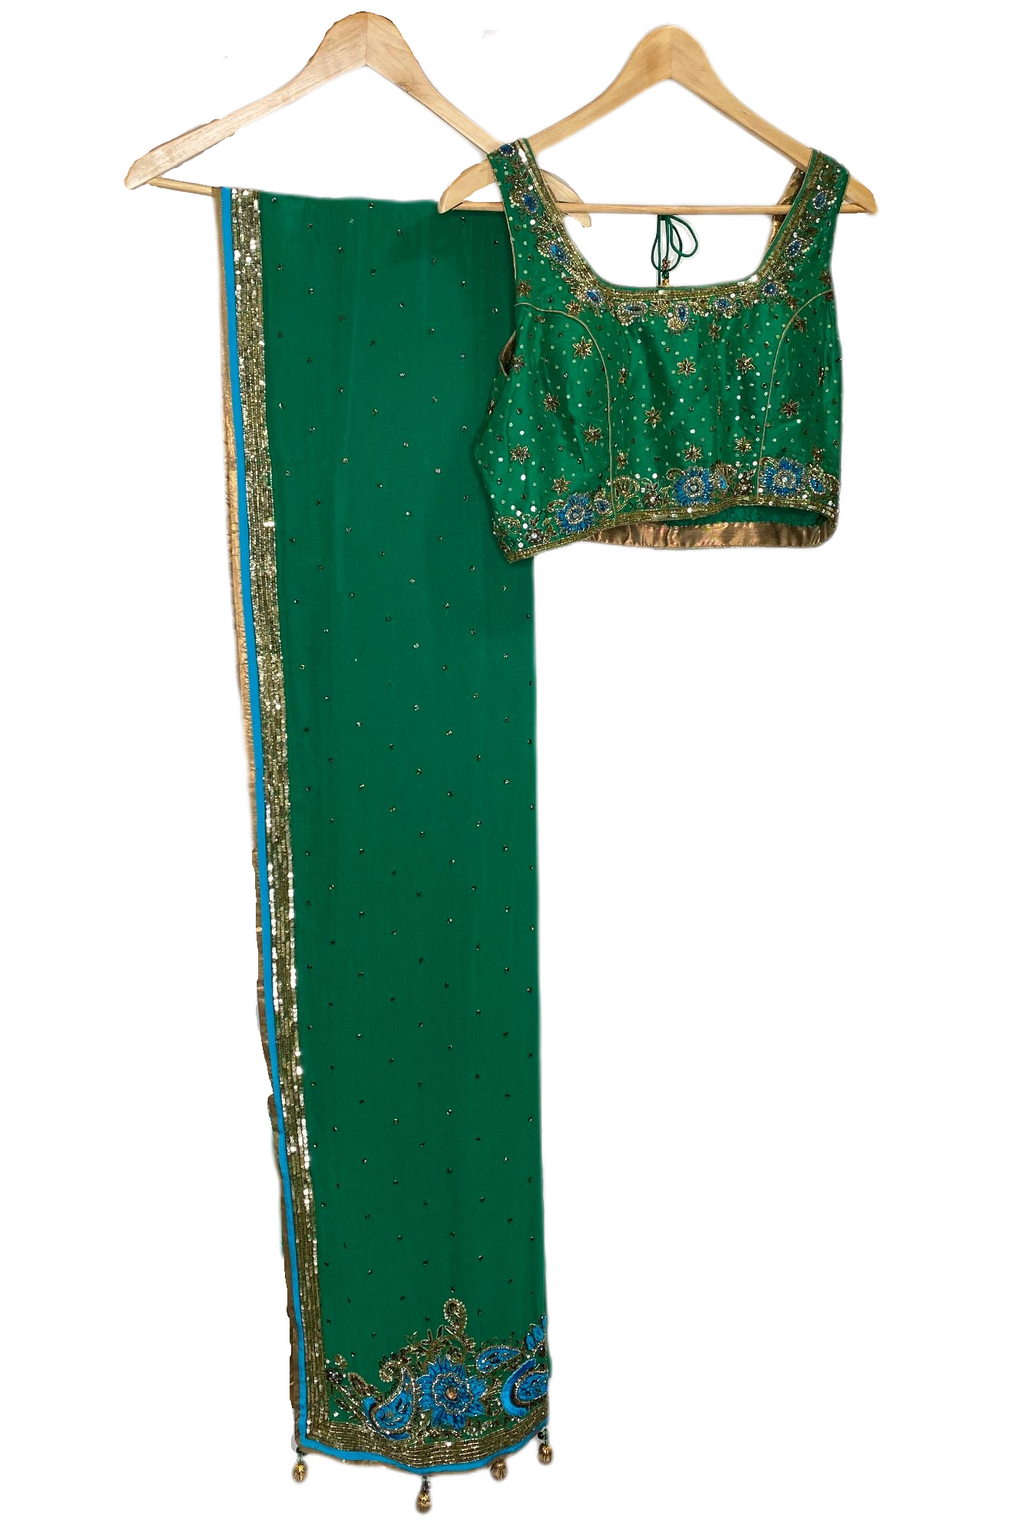 Saree: Golden Sequins & Pipe work with Blue Velvet & Thread Work Material: Georgette  Colour: Green & Blue Blouse: Golden Sequins & Pipe work with Blue Velvet & Thread Work Material: Silk Size: Bust 40 (3" extra material) Colour: Green & Blue